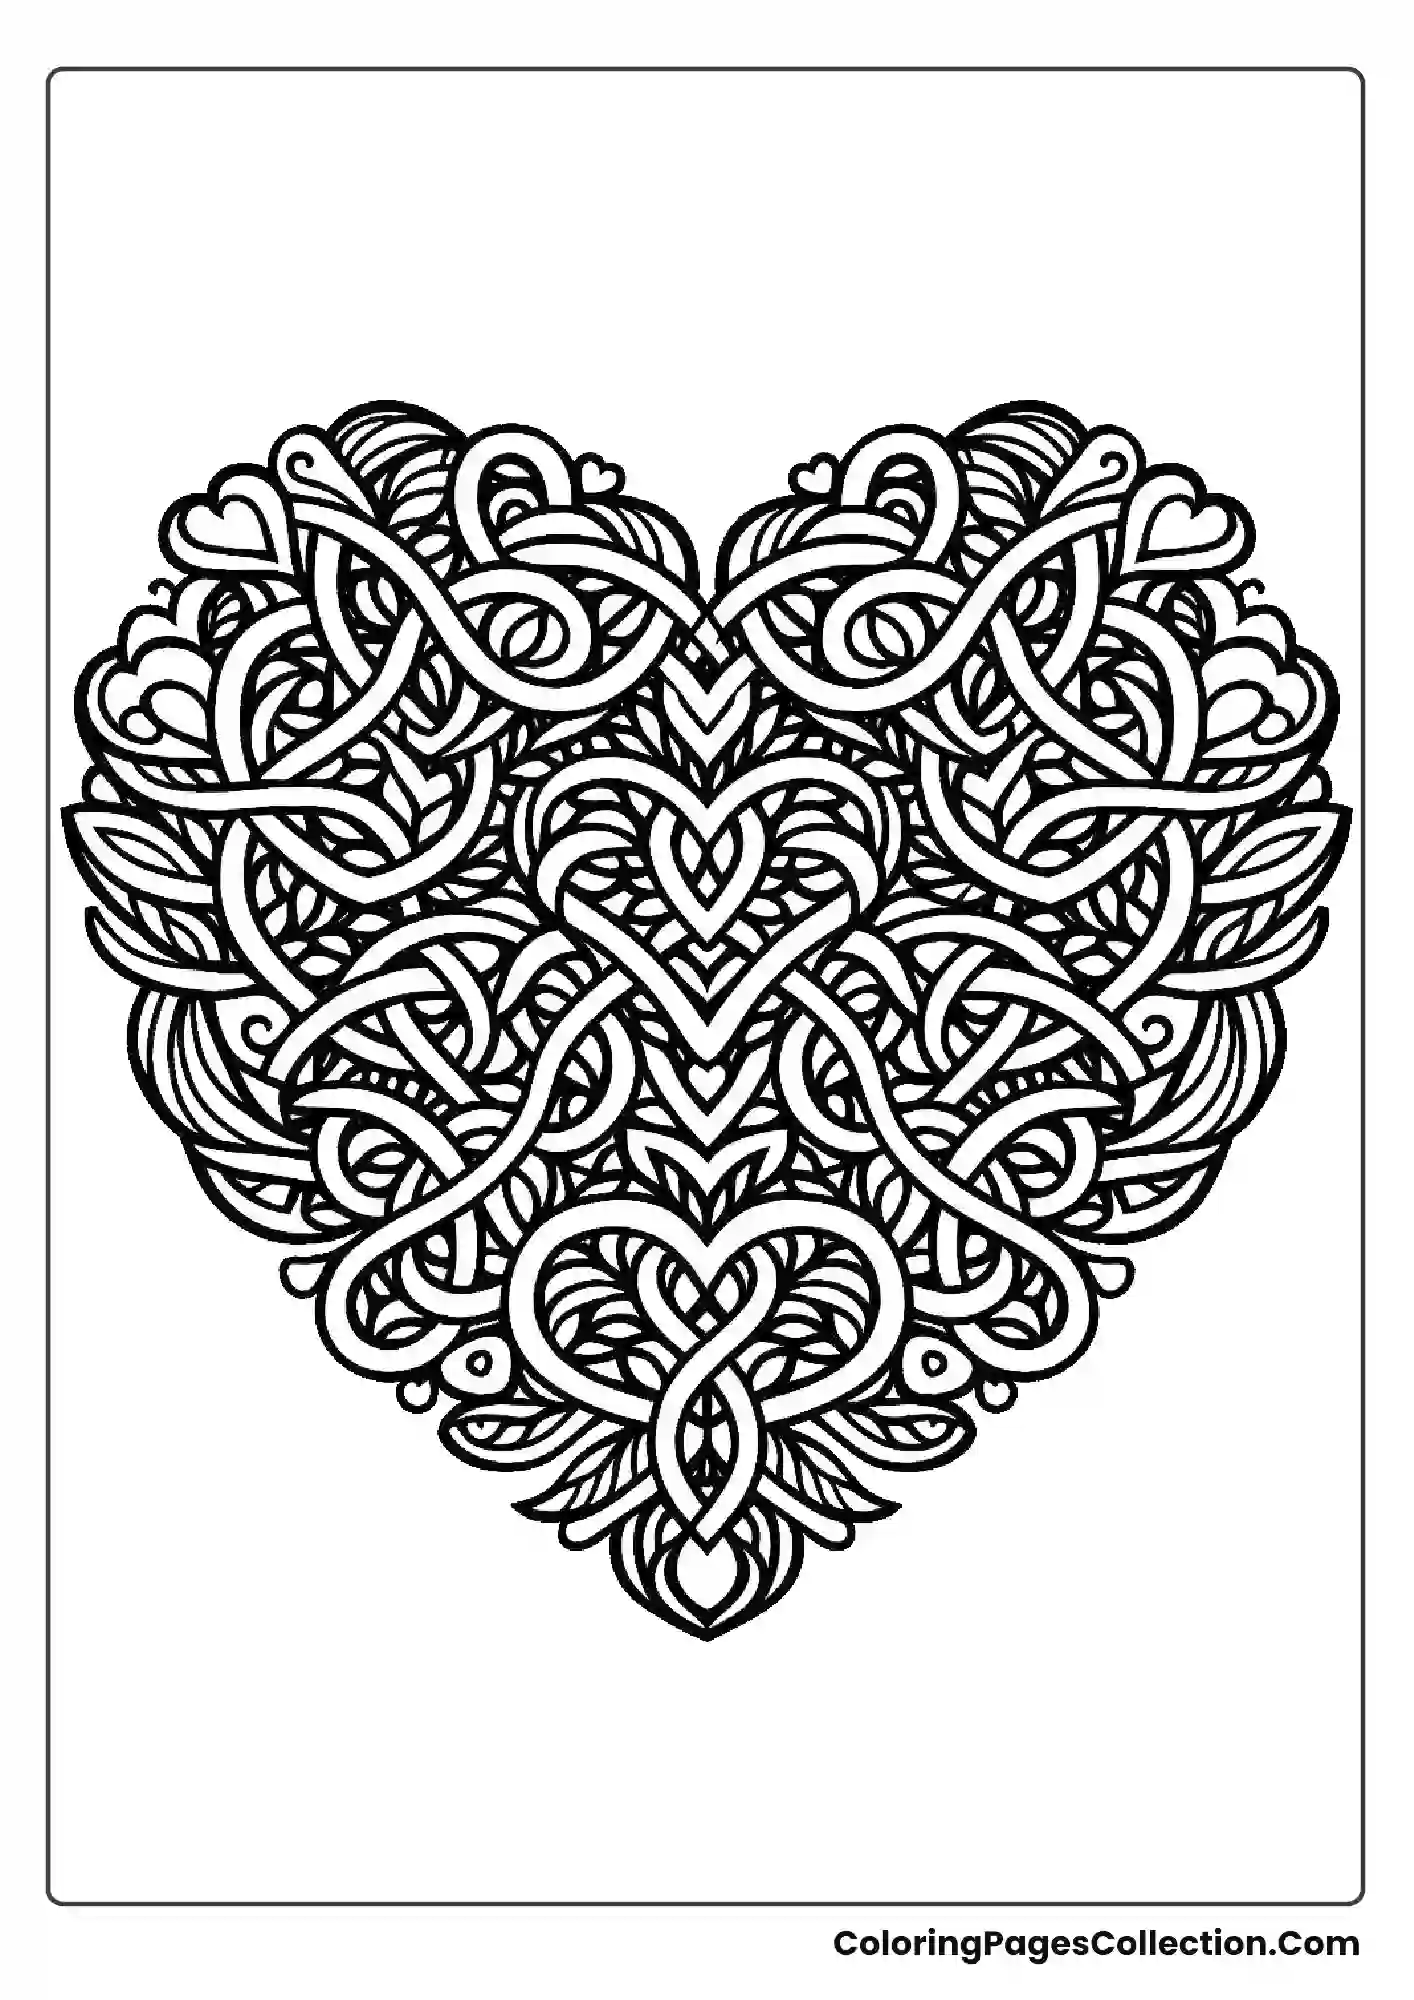 A Pattern Of Interlocking Hearts Forming A Larger Heart Shape